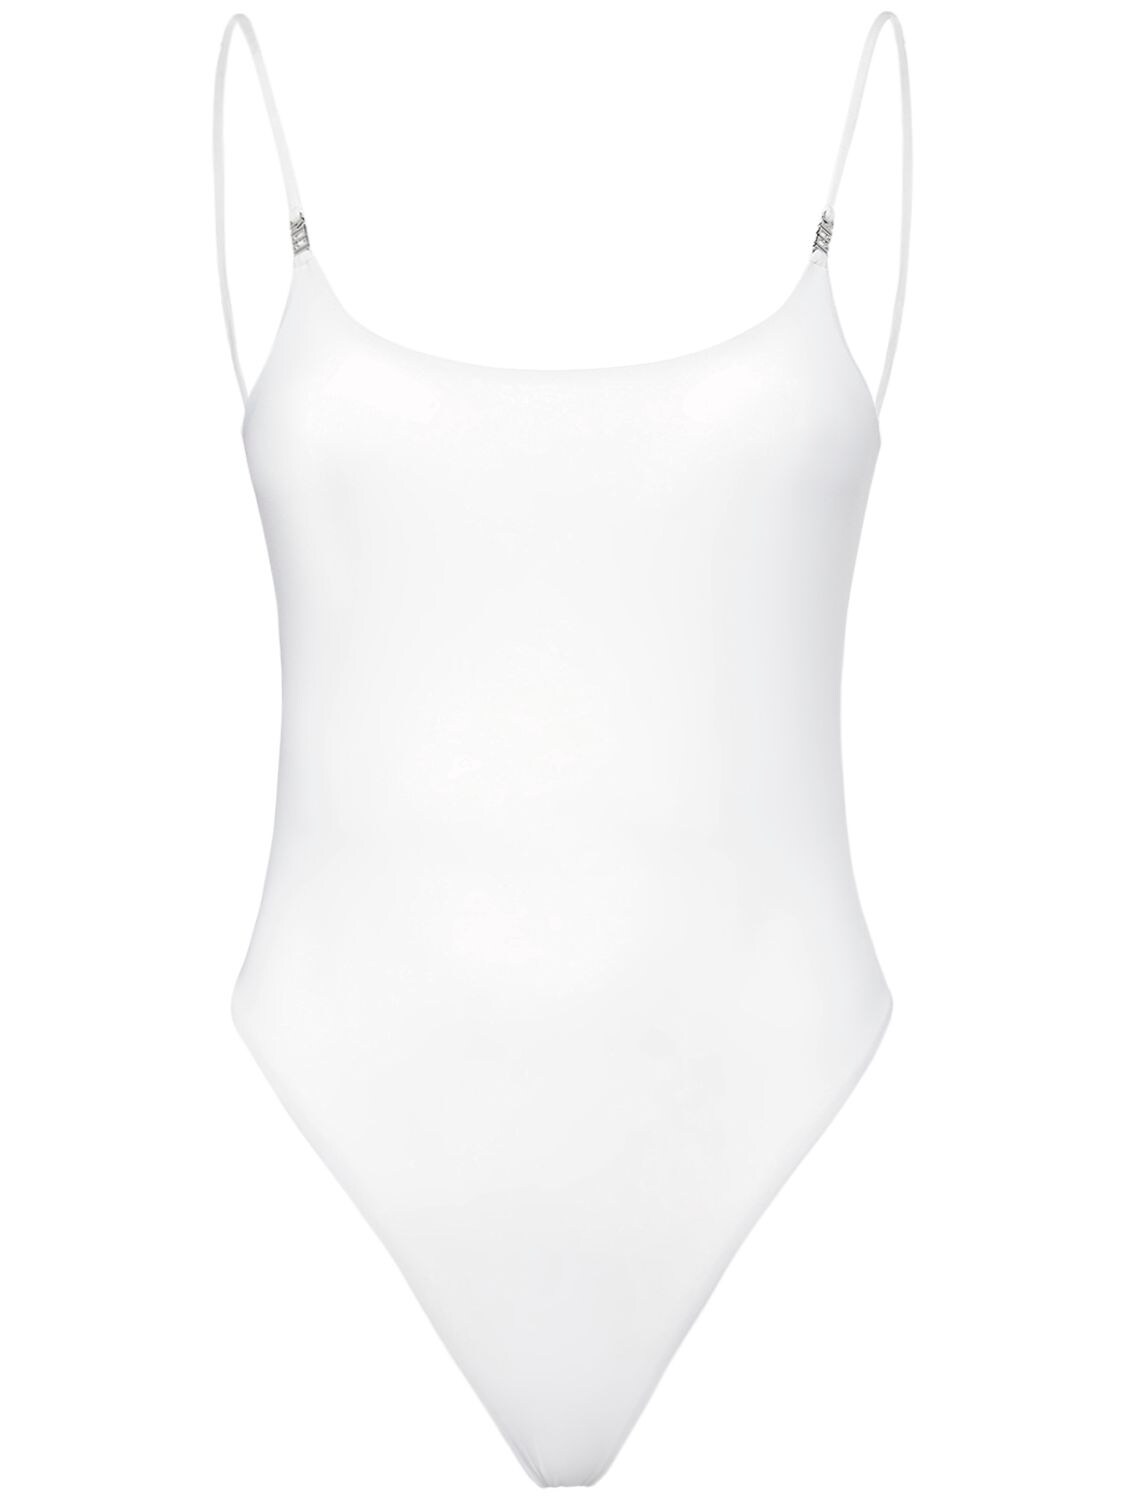 DSQUARED2 ICON JERSEY OPEN BACK ONE PIECE SWIMSUIT